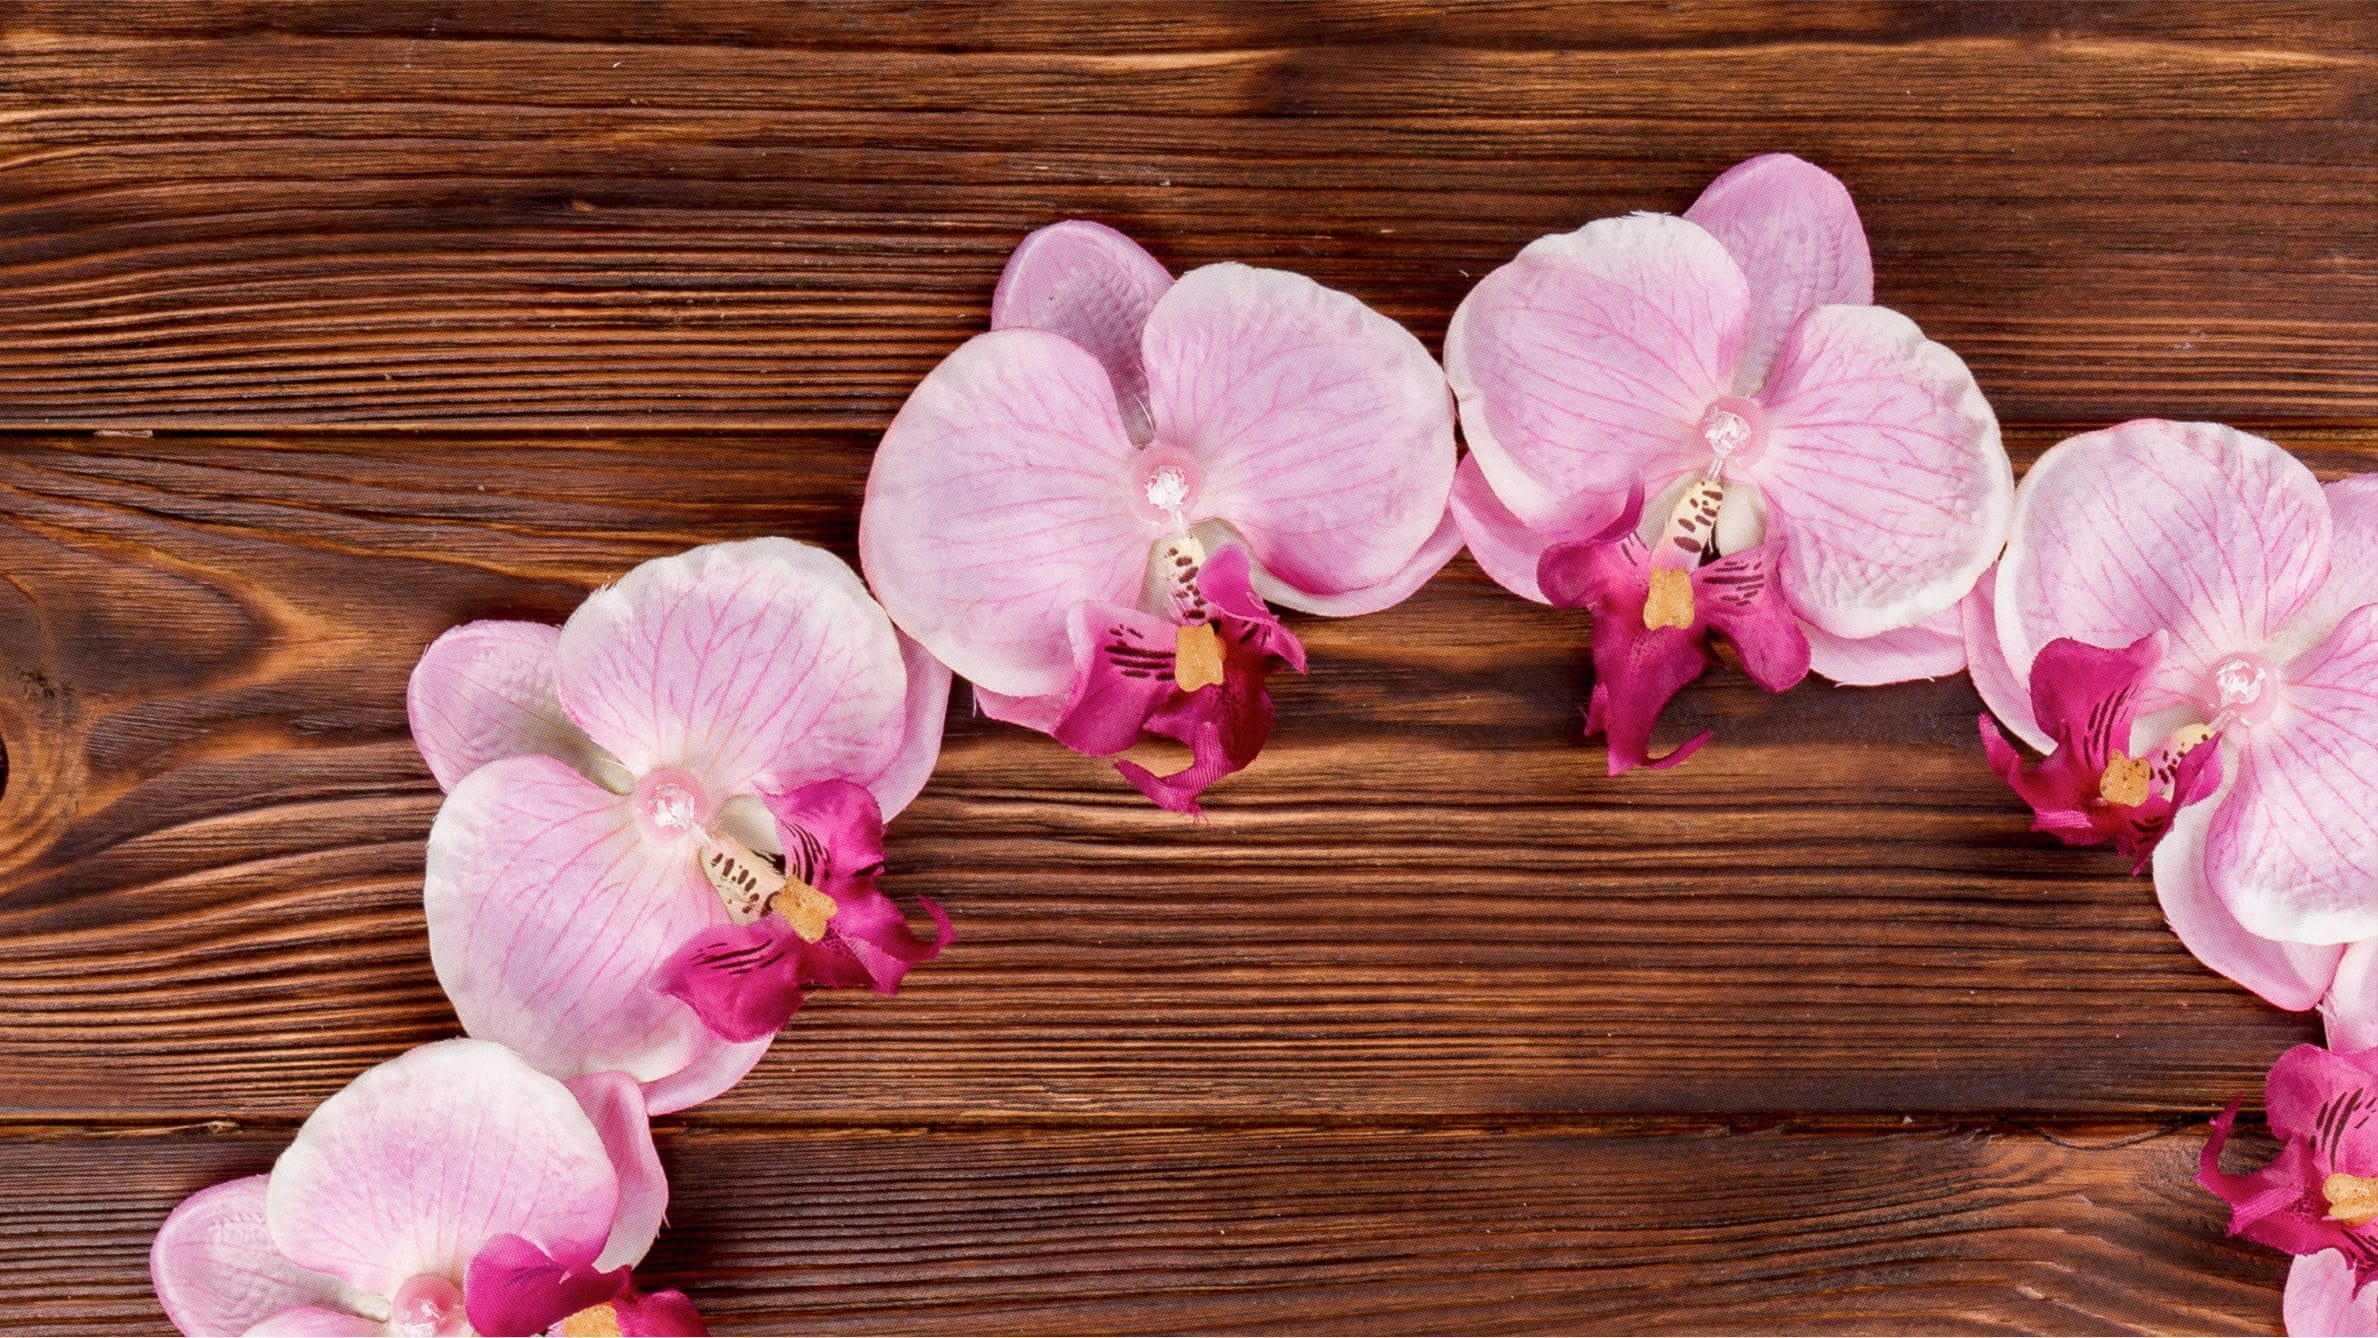 Orchid meaning flower